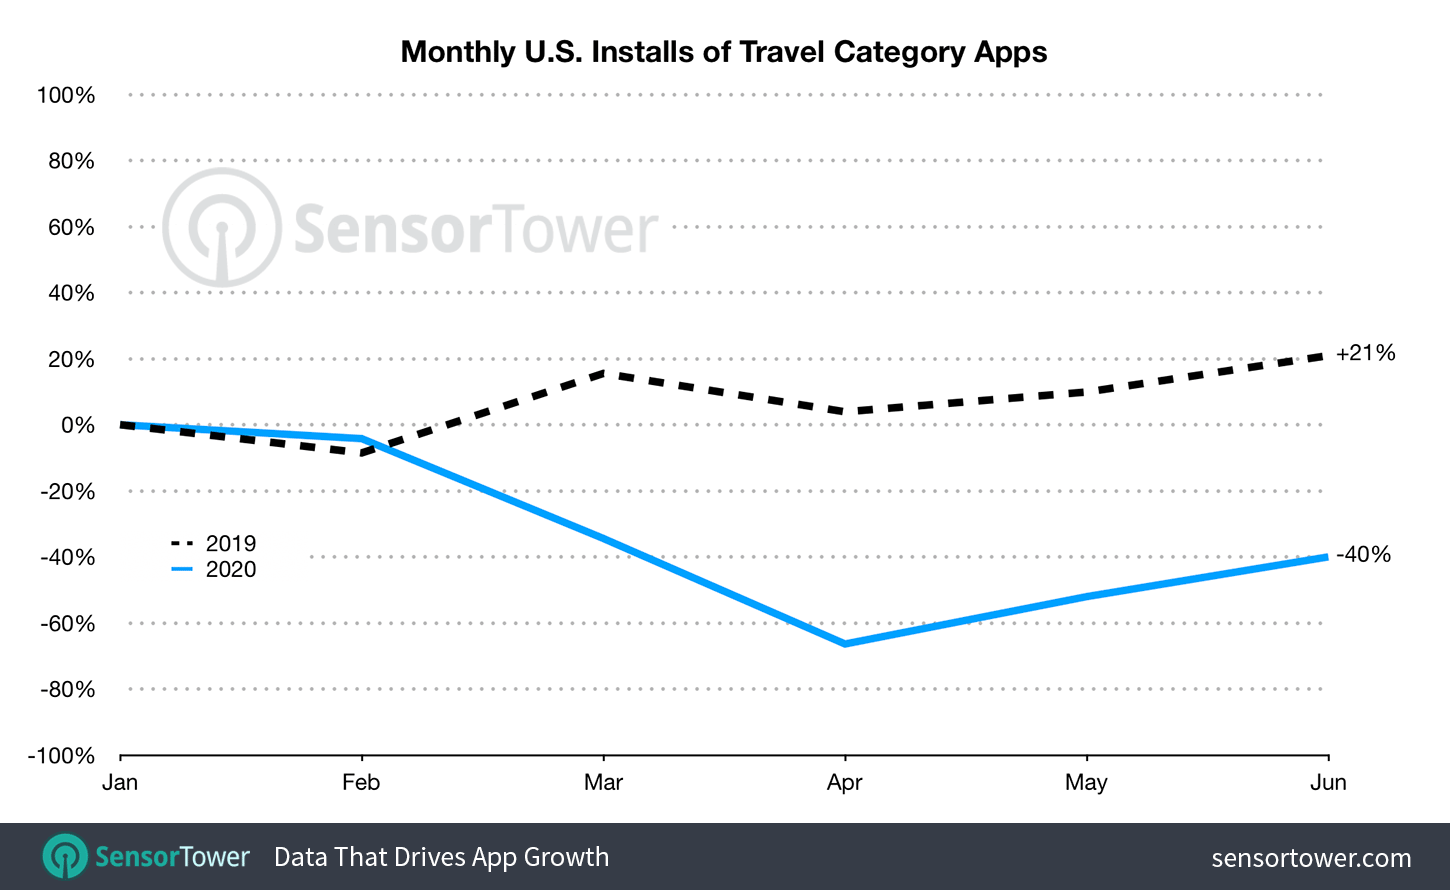 U.S. Travel apps in June hit only about 60 percent of the installs from January